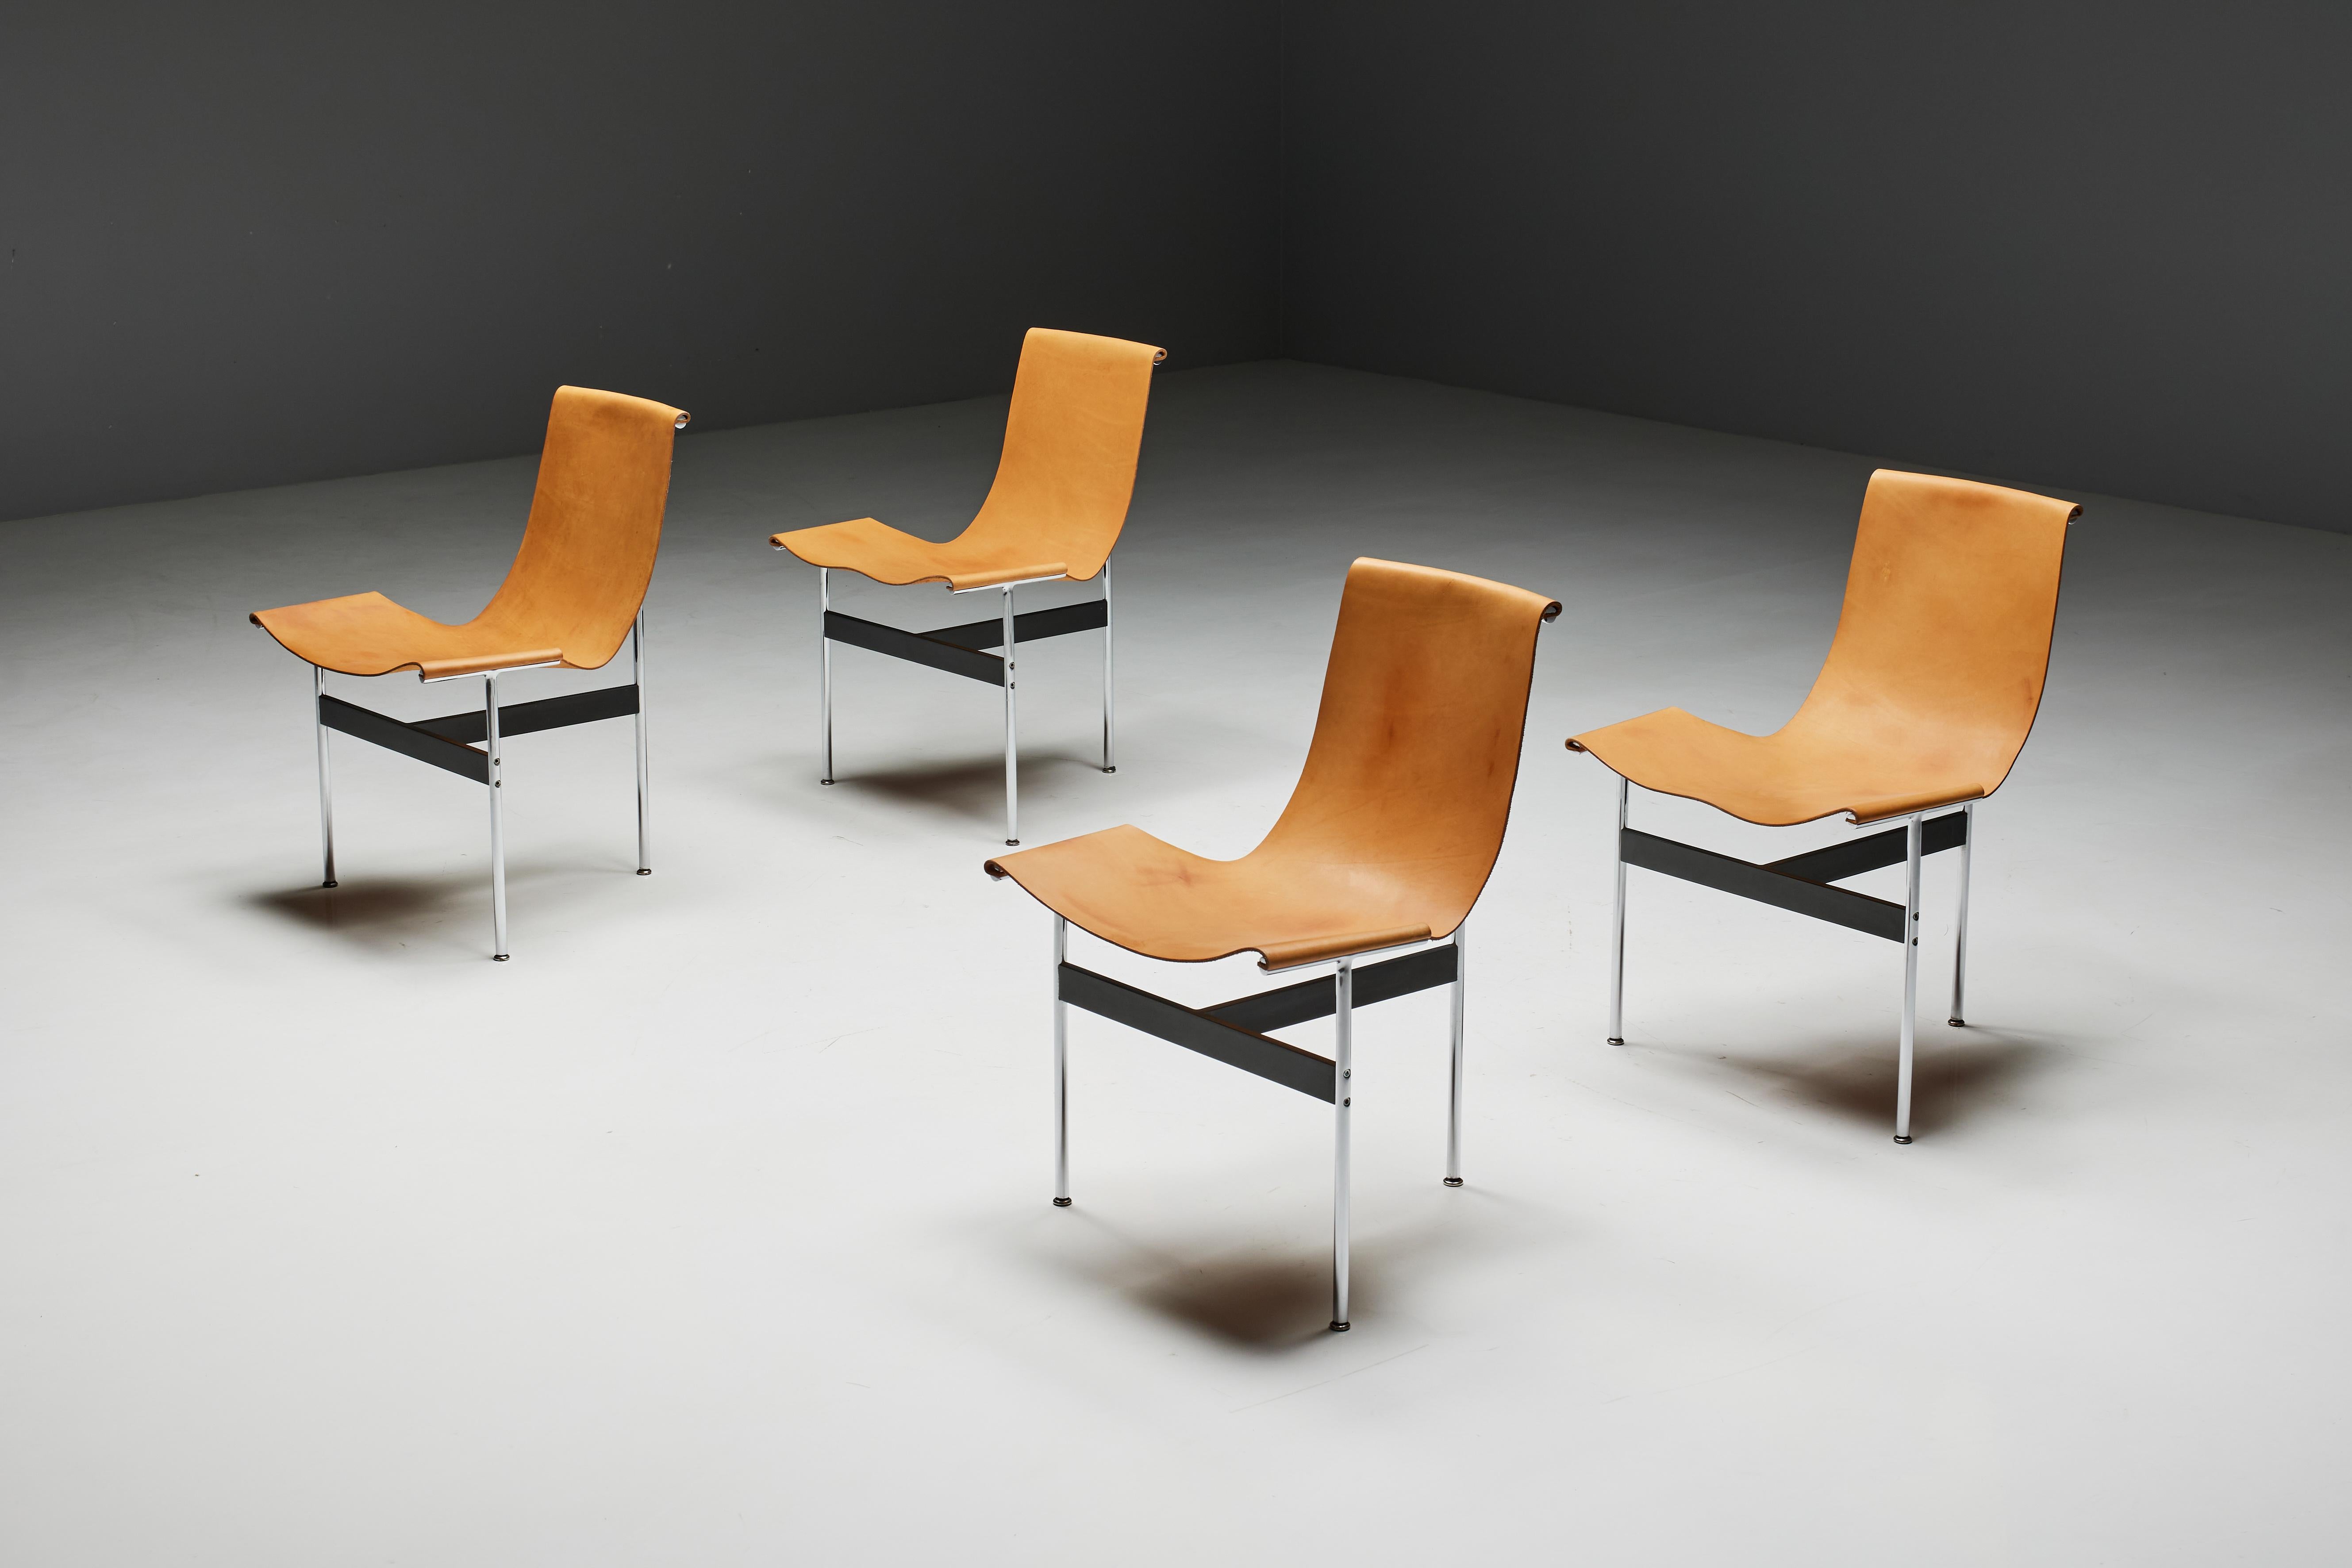 American T-Chairs by Katavolos, Kelley & Littell for Laverne International, US, 1950s For Sale